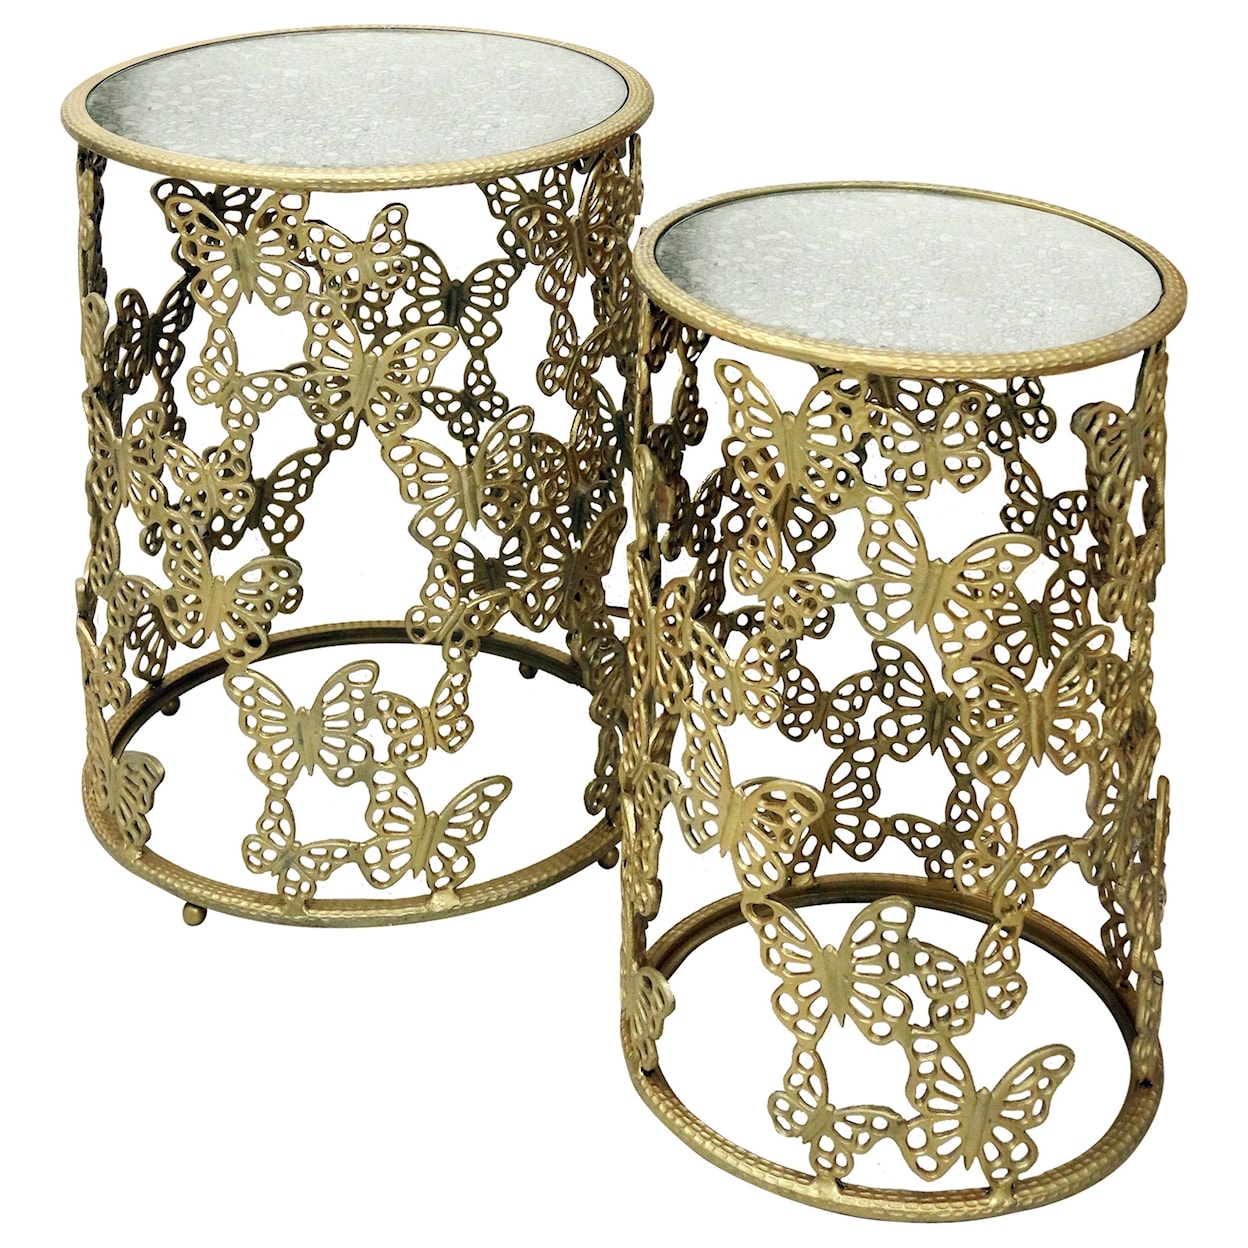 StyleCraft Occasional Tables Gold 2 Piece Round Nesting Table